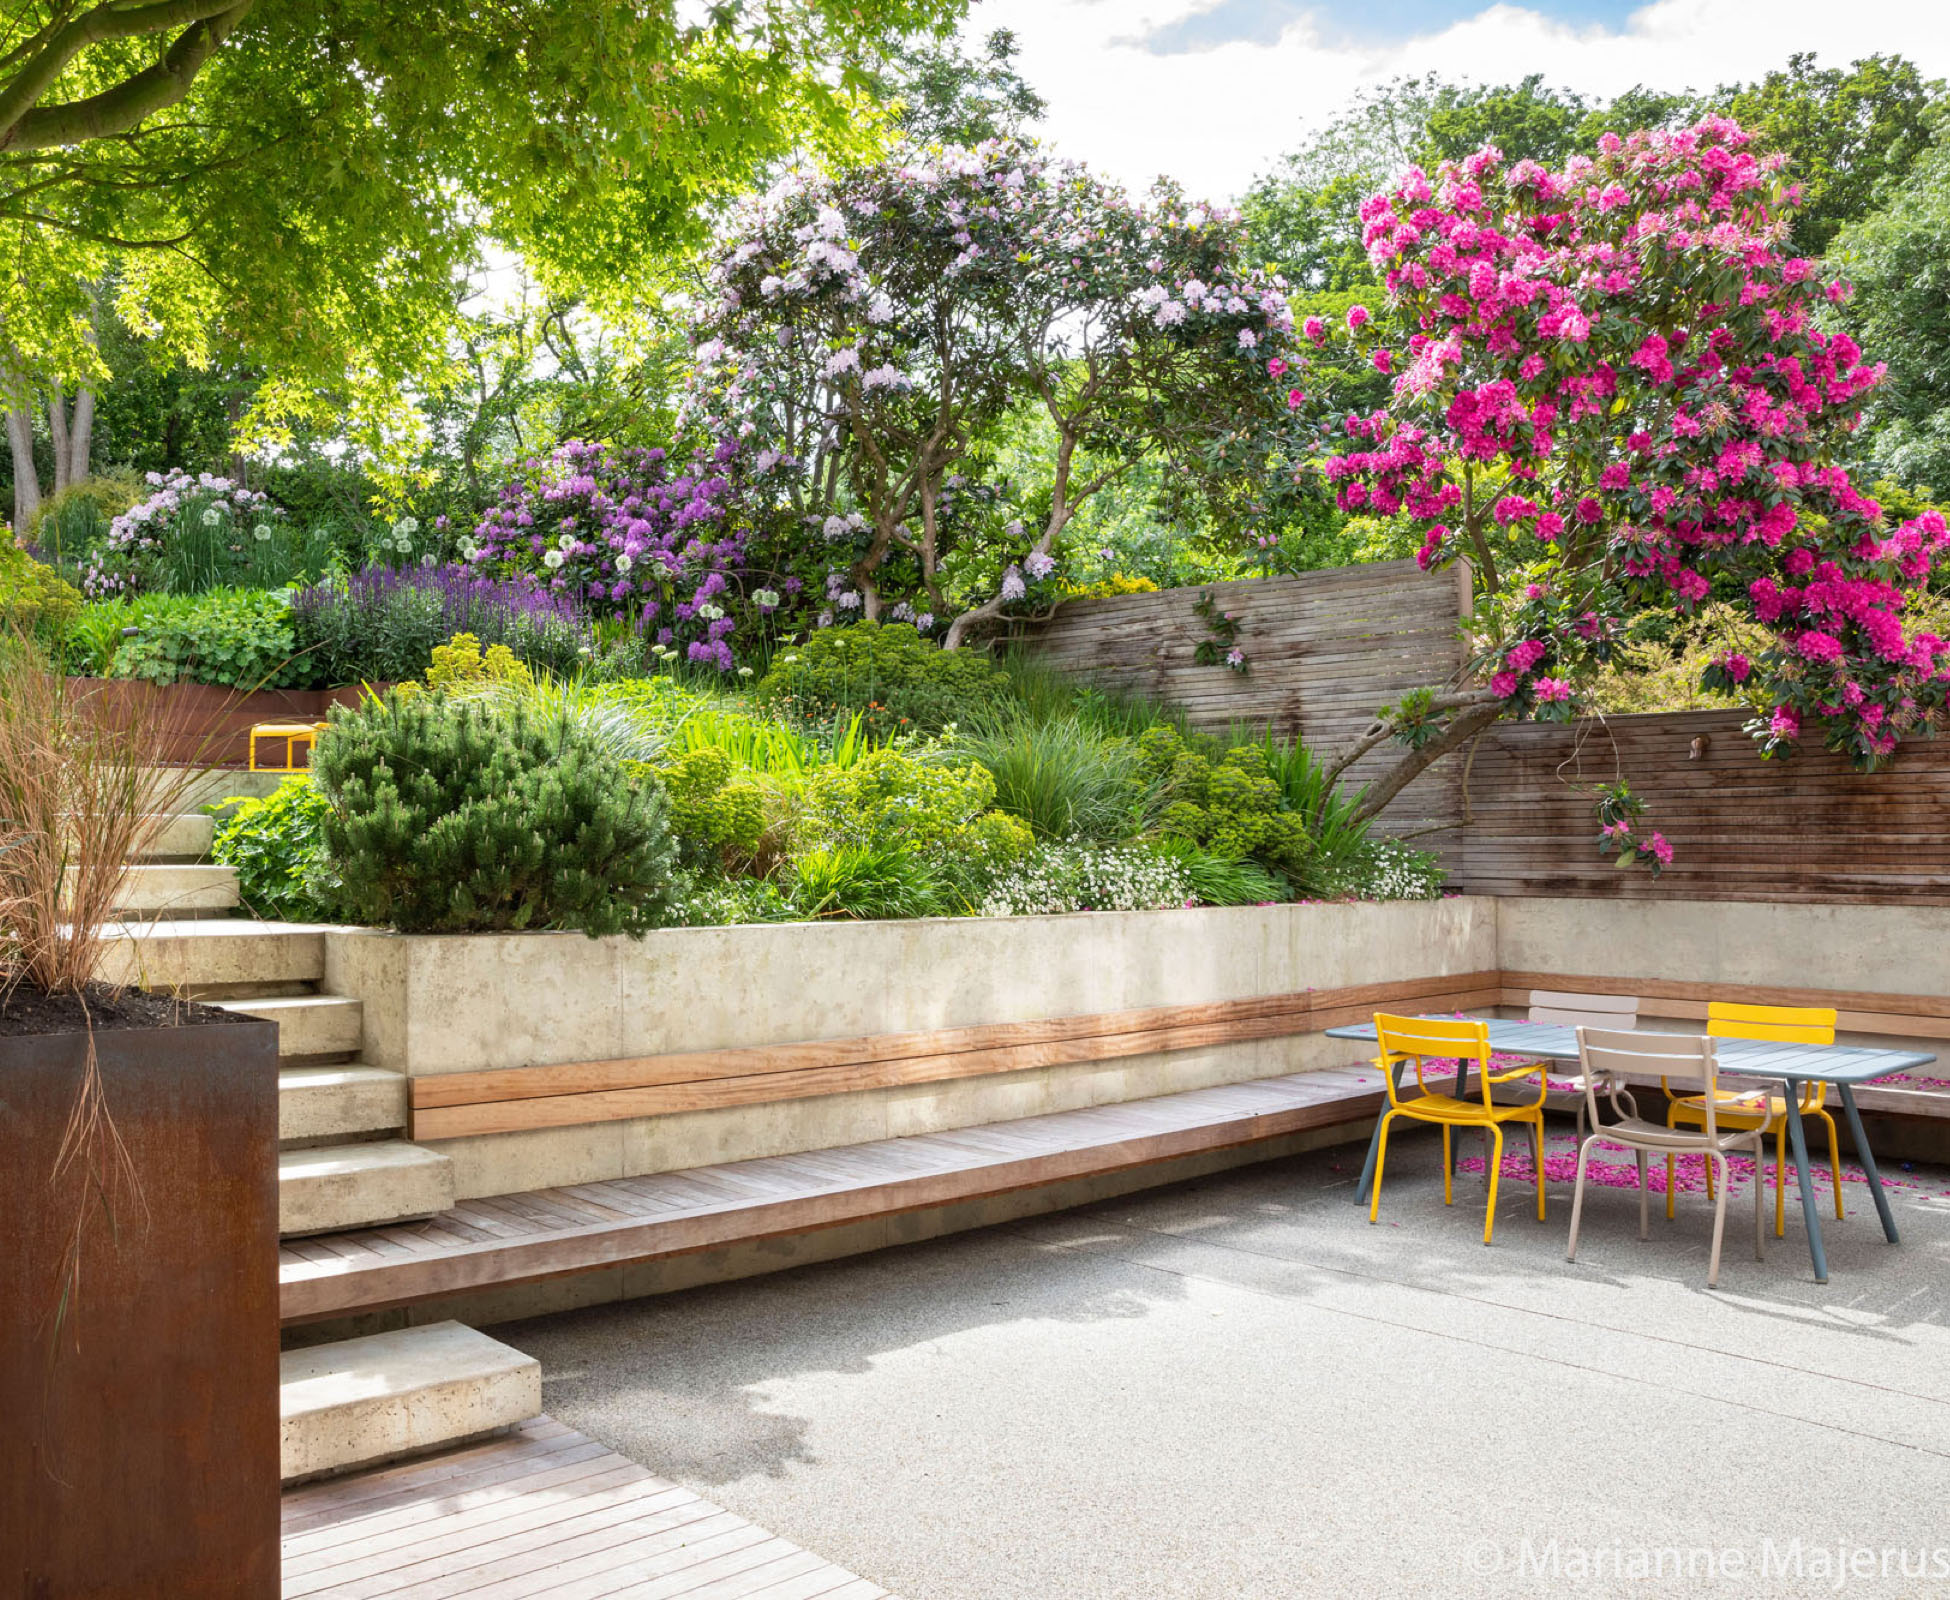 The patio is enclosed by a retaining wall  in poured concrete and corten; an existing Acer overhangs the space casting dappled shade, with the vibrant pink Rhododendrons stealing the show.